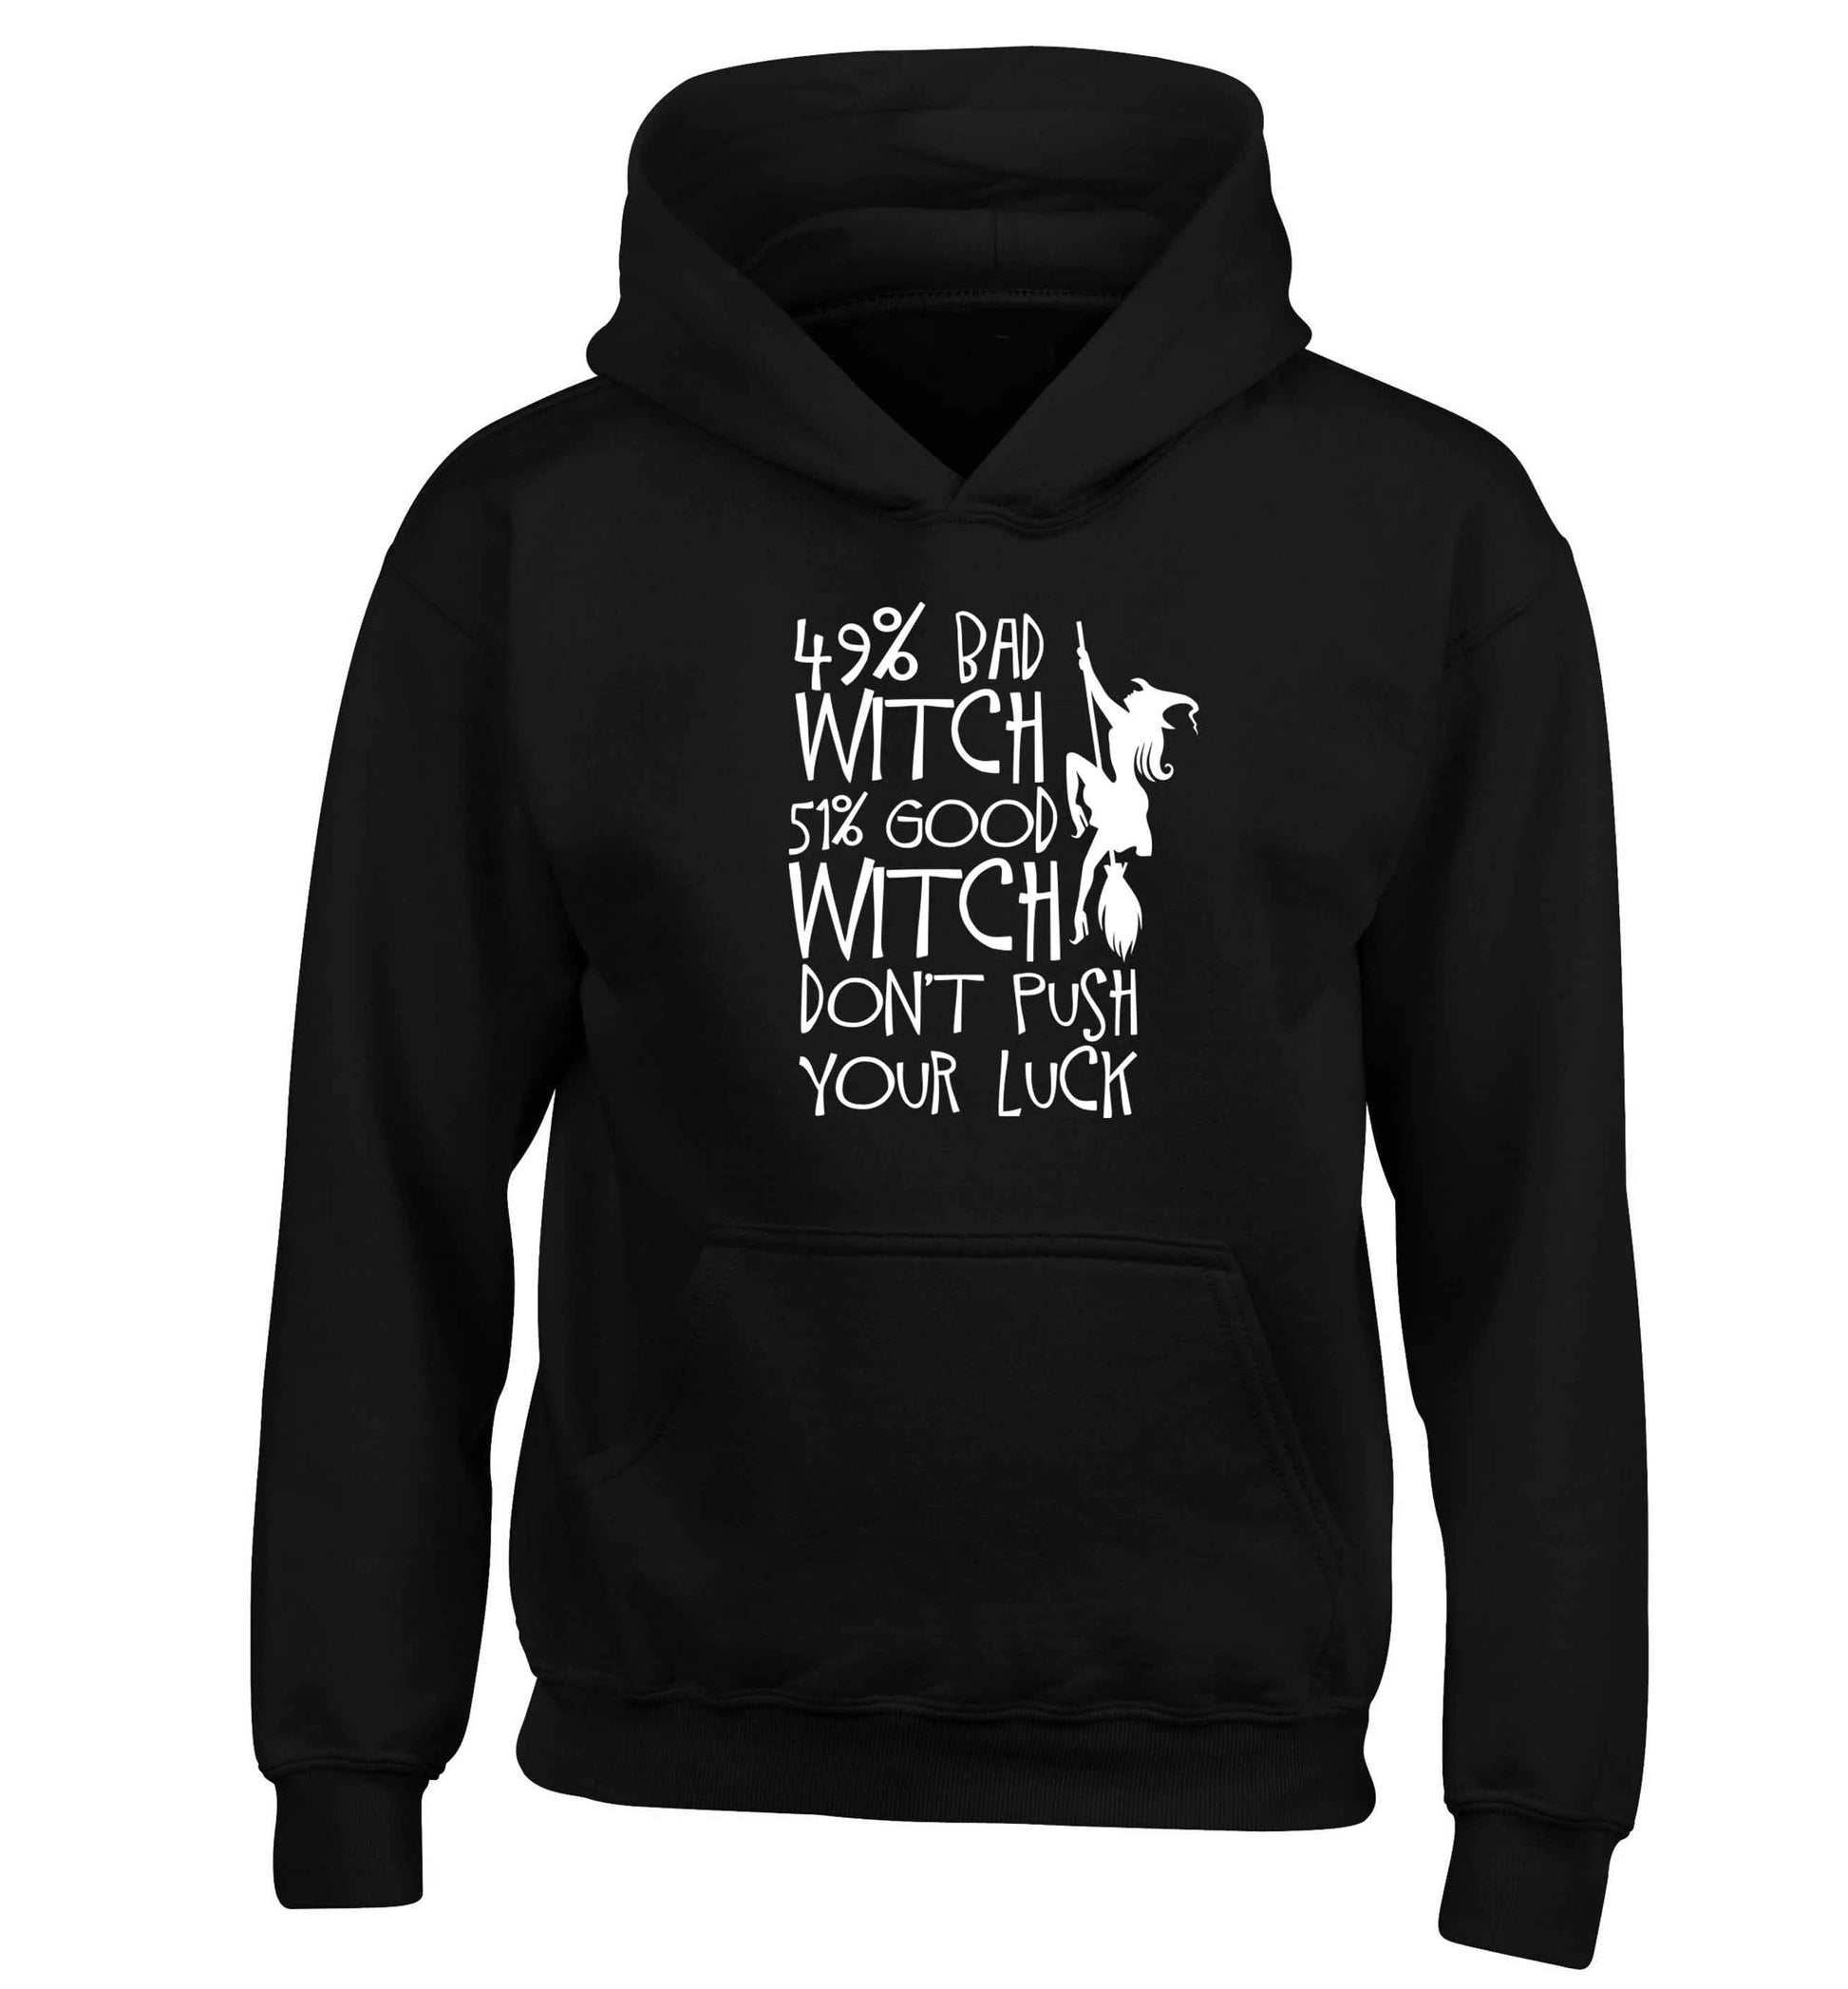 49% bad witch 51% good witch don't push your luck children's black hoodie 12-13 Years